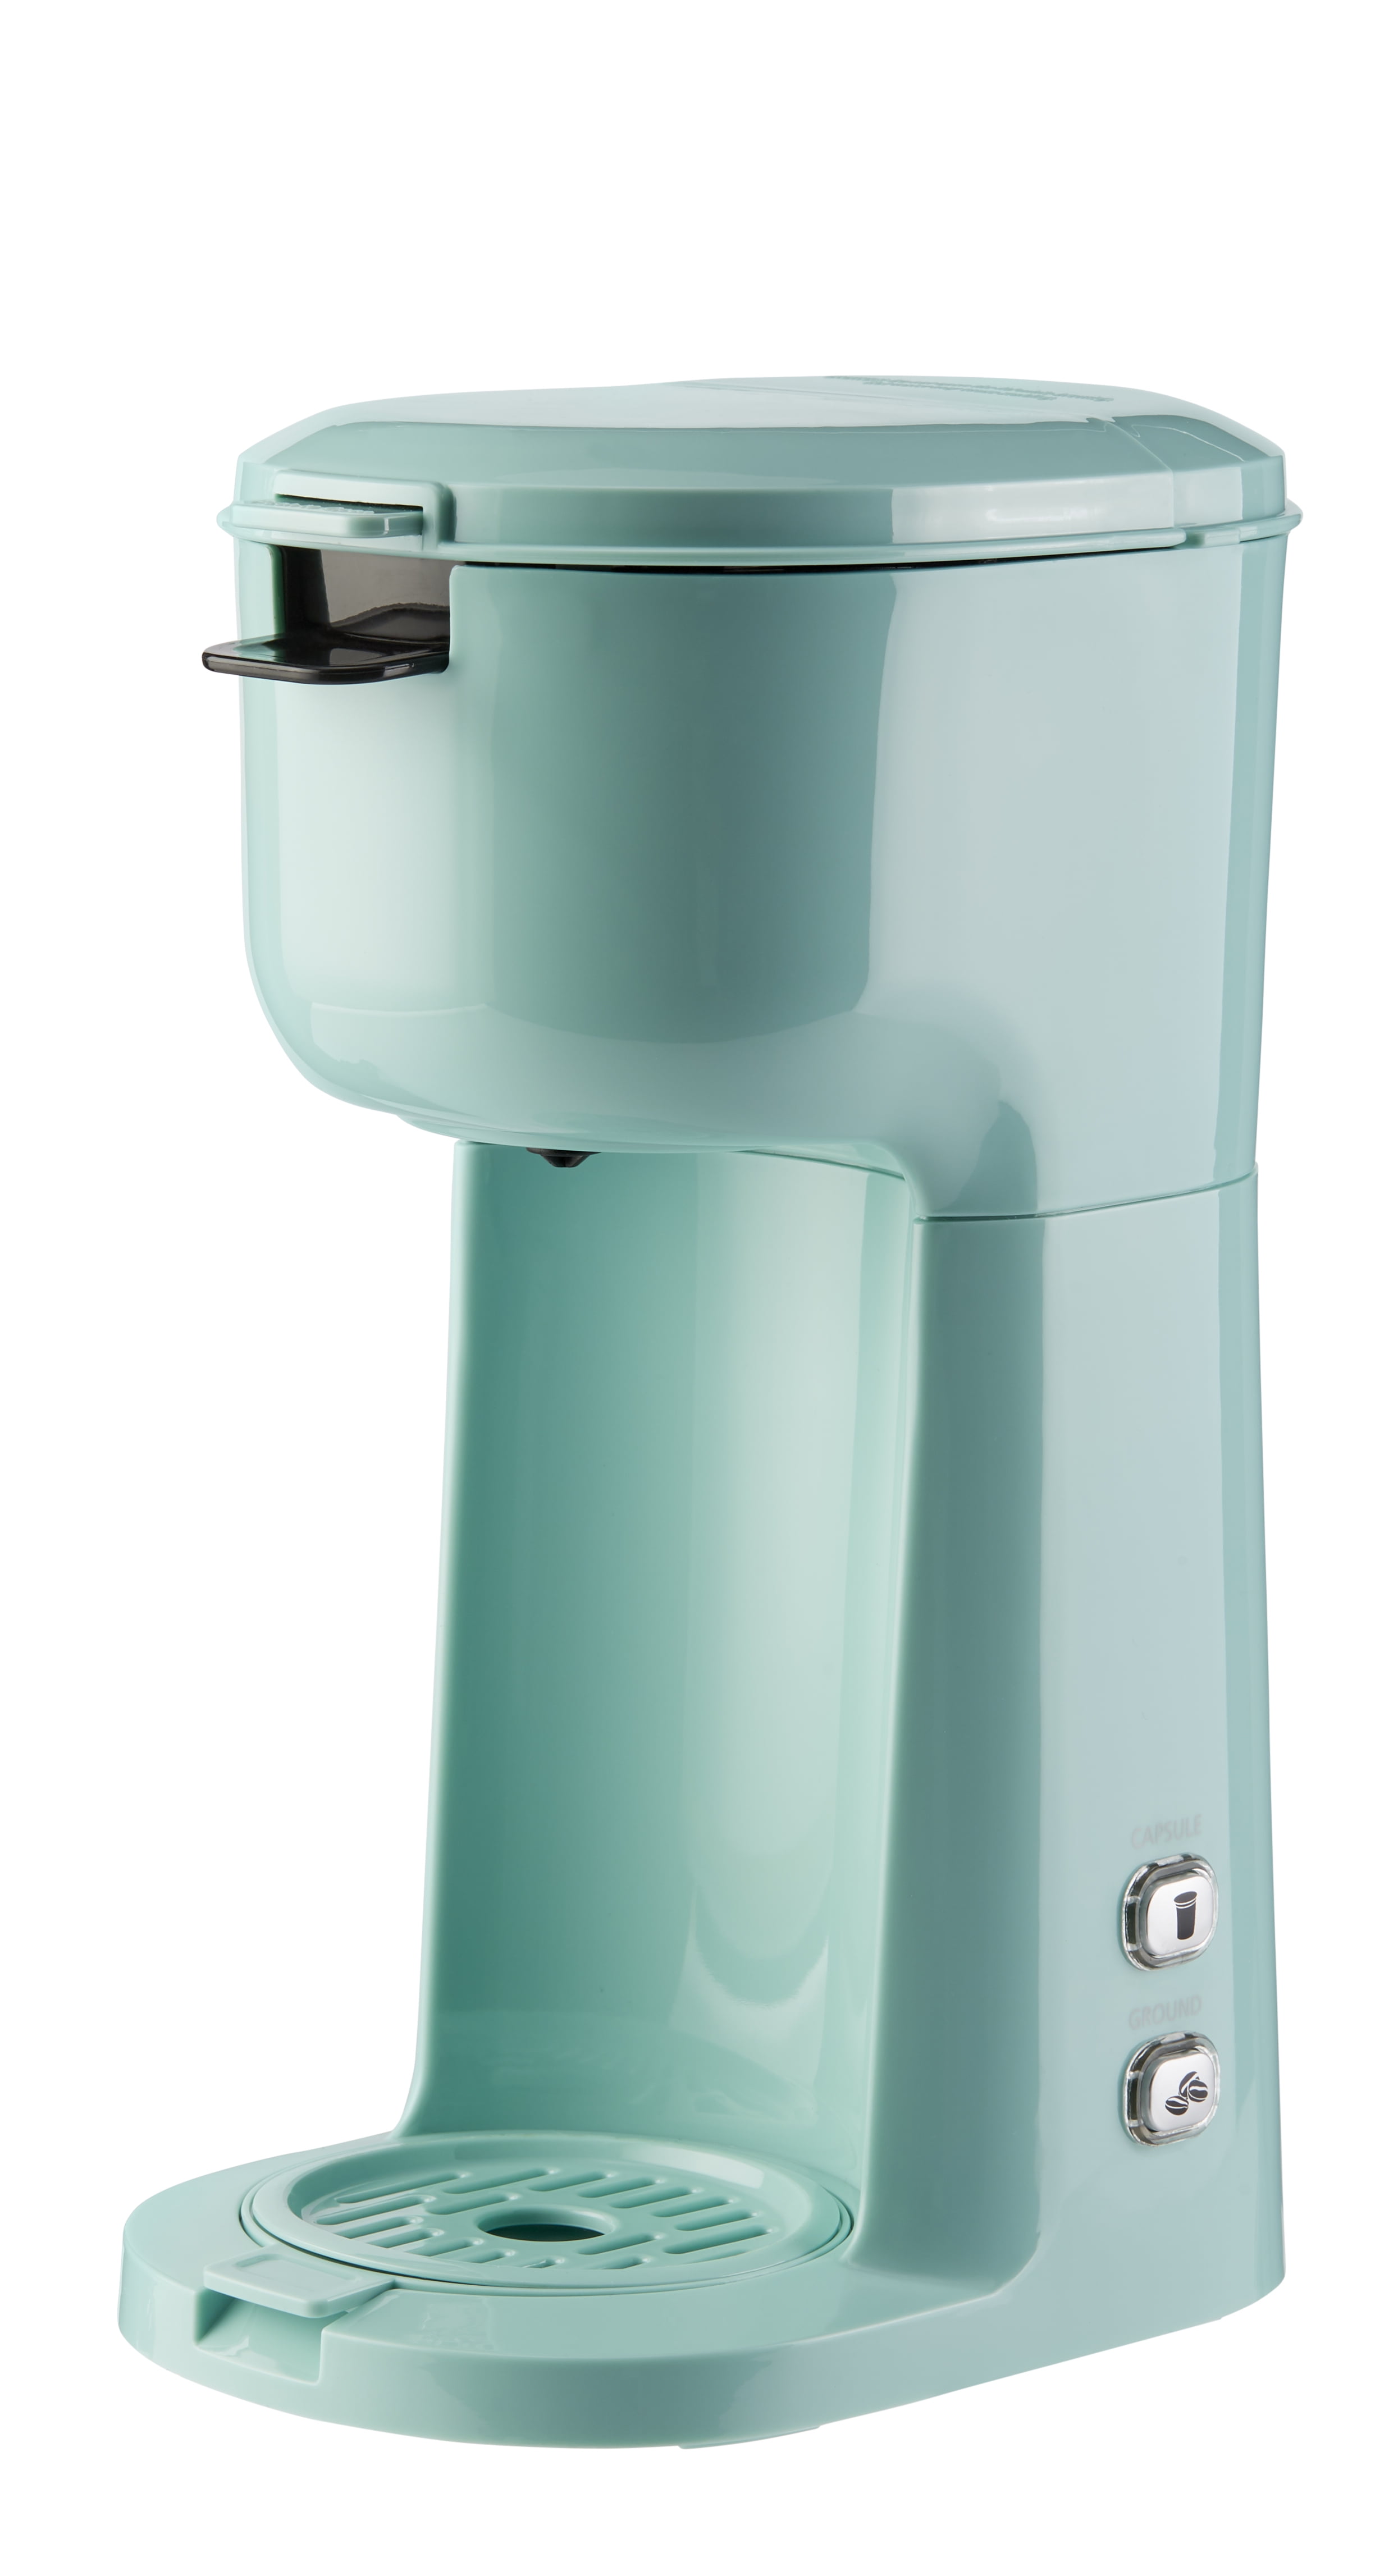 Mainstays 5-Cup Glass Carafe Coffee Maker, Mint Green $8.88